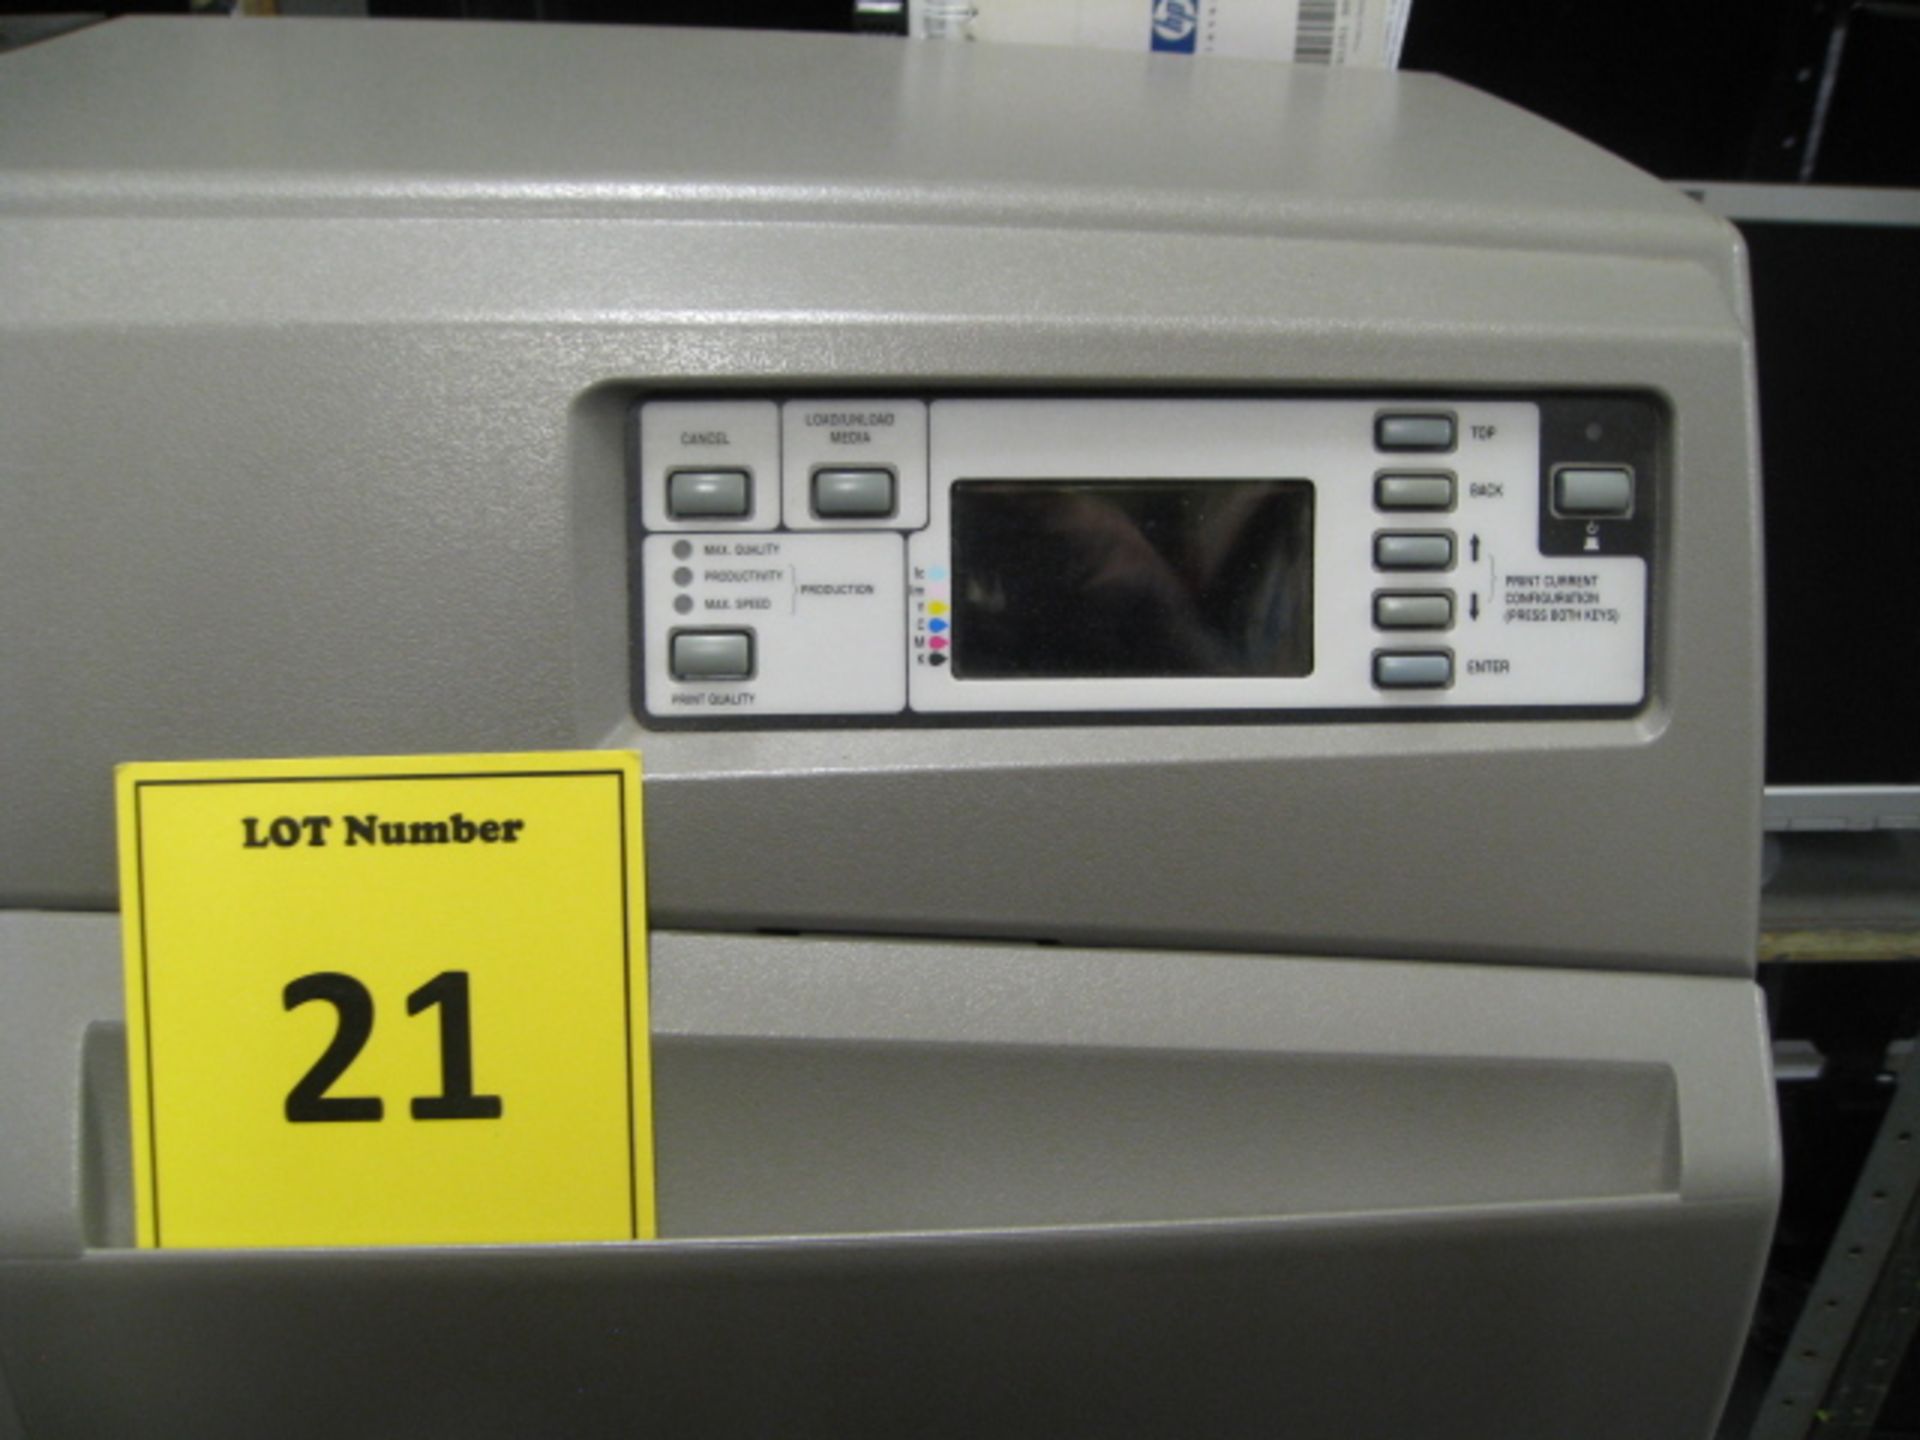 HP DESIGNJET 5500 PLOTTER. Model Q1251A. WITH TEST PRINT & USER GUIDE - Image 2 of 6